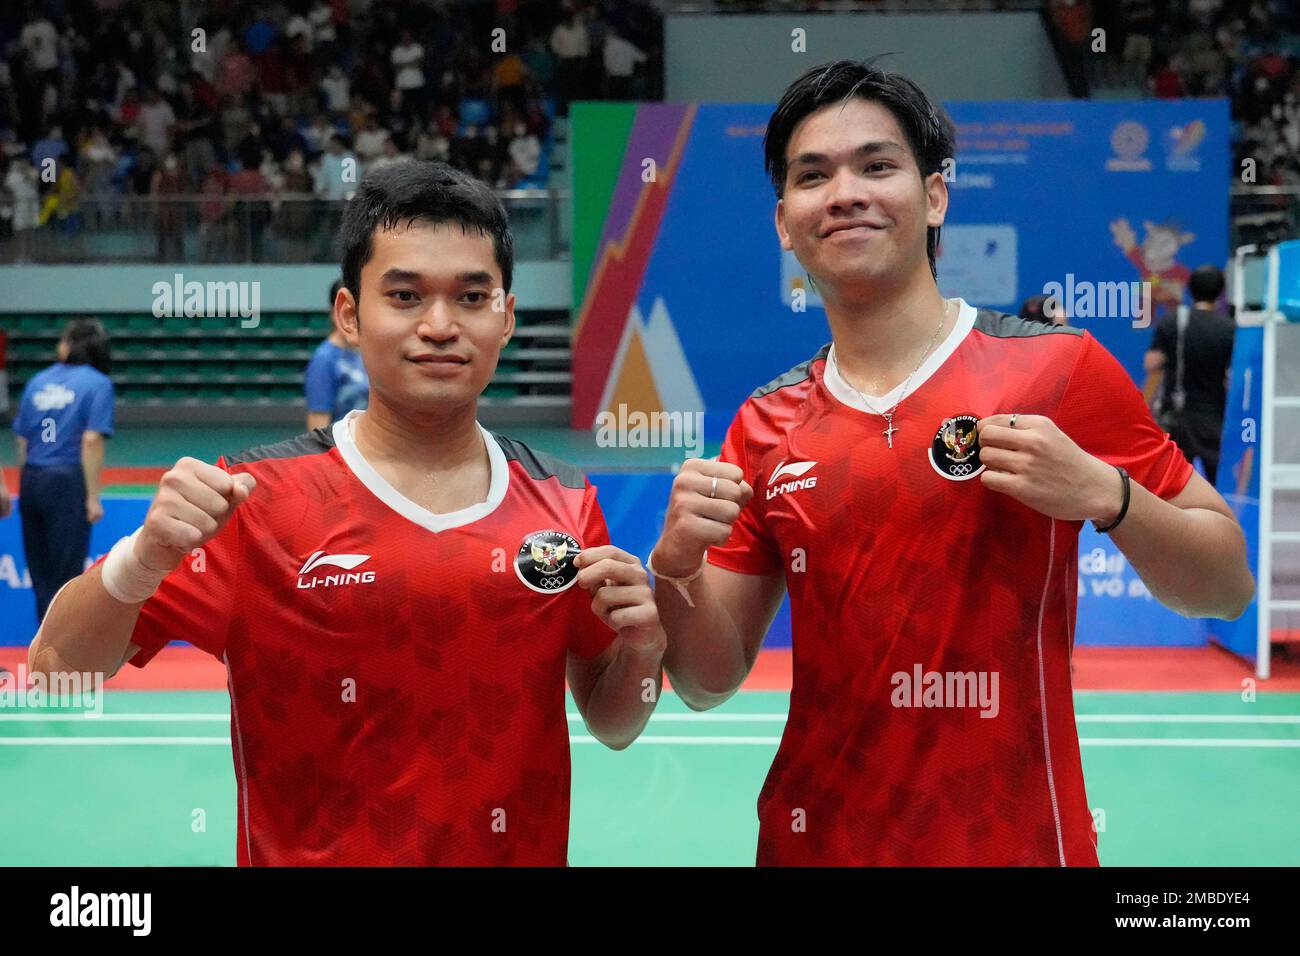 Indonesias Daniel Marthin, right, and Leo Rolly Carnando celebrate after defeating their compatriots Pramudya Kusumawardana and Yeremia Rambitan during their mens doubles badminton final match at the 31st Southeast Asian Games (SEA